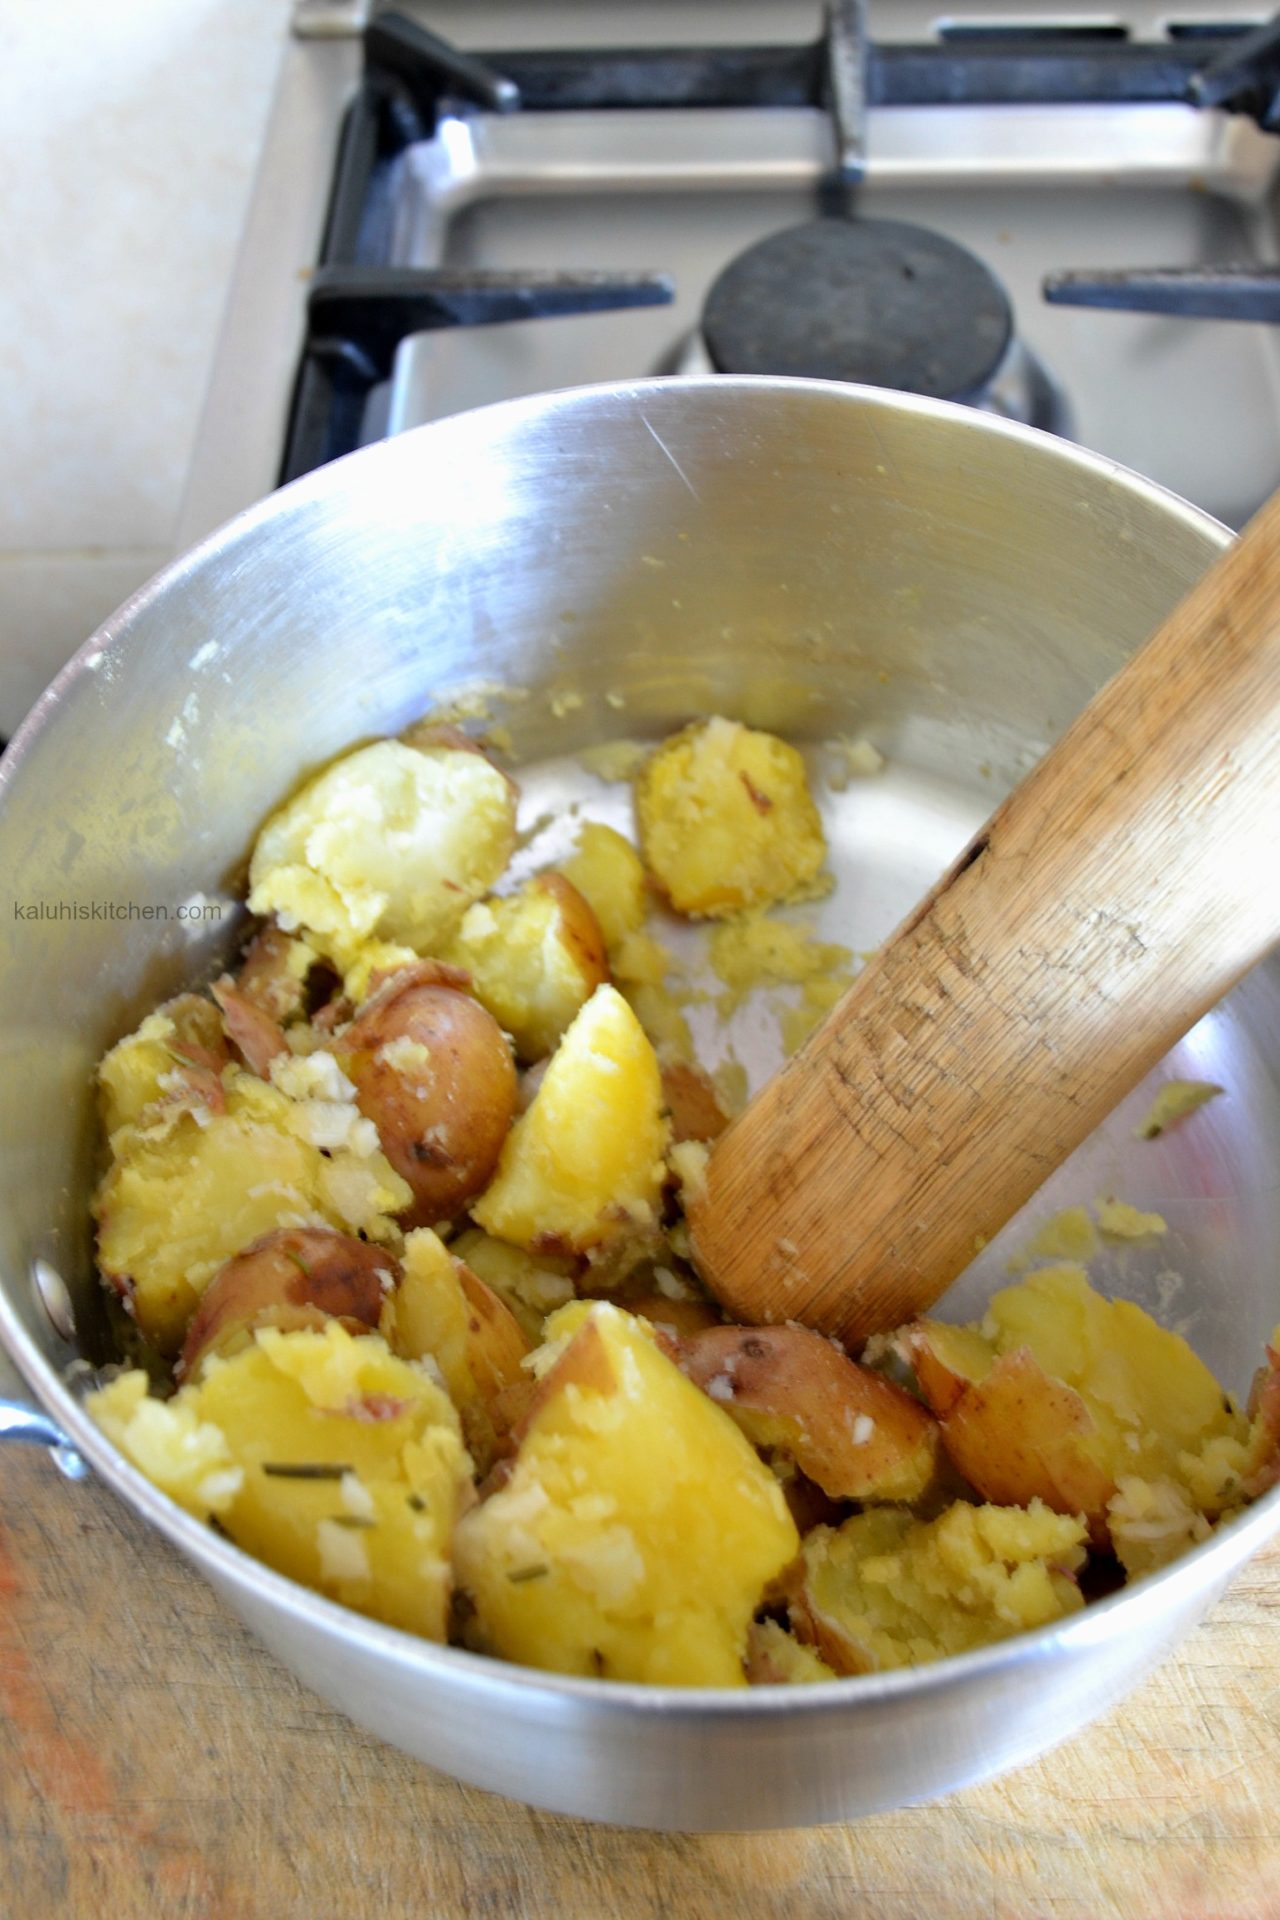 mashing potatoes_smashed potatoes anre more texturesd and rough compared to mashed potatoes which have a creamier texture